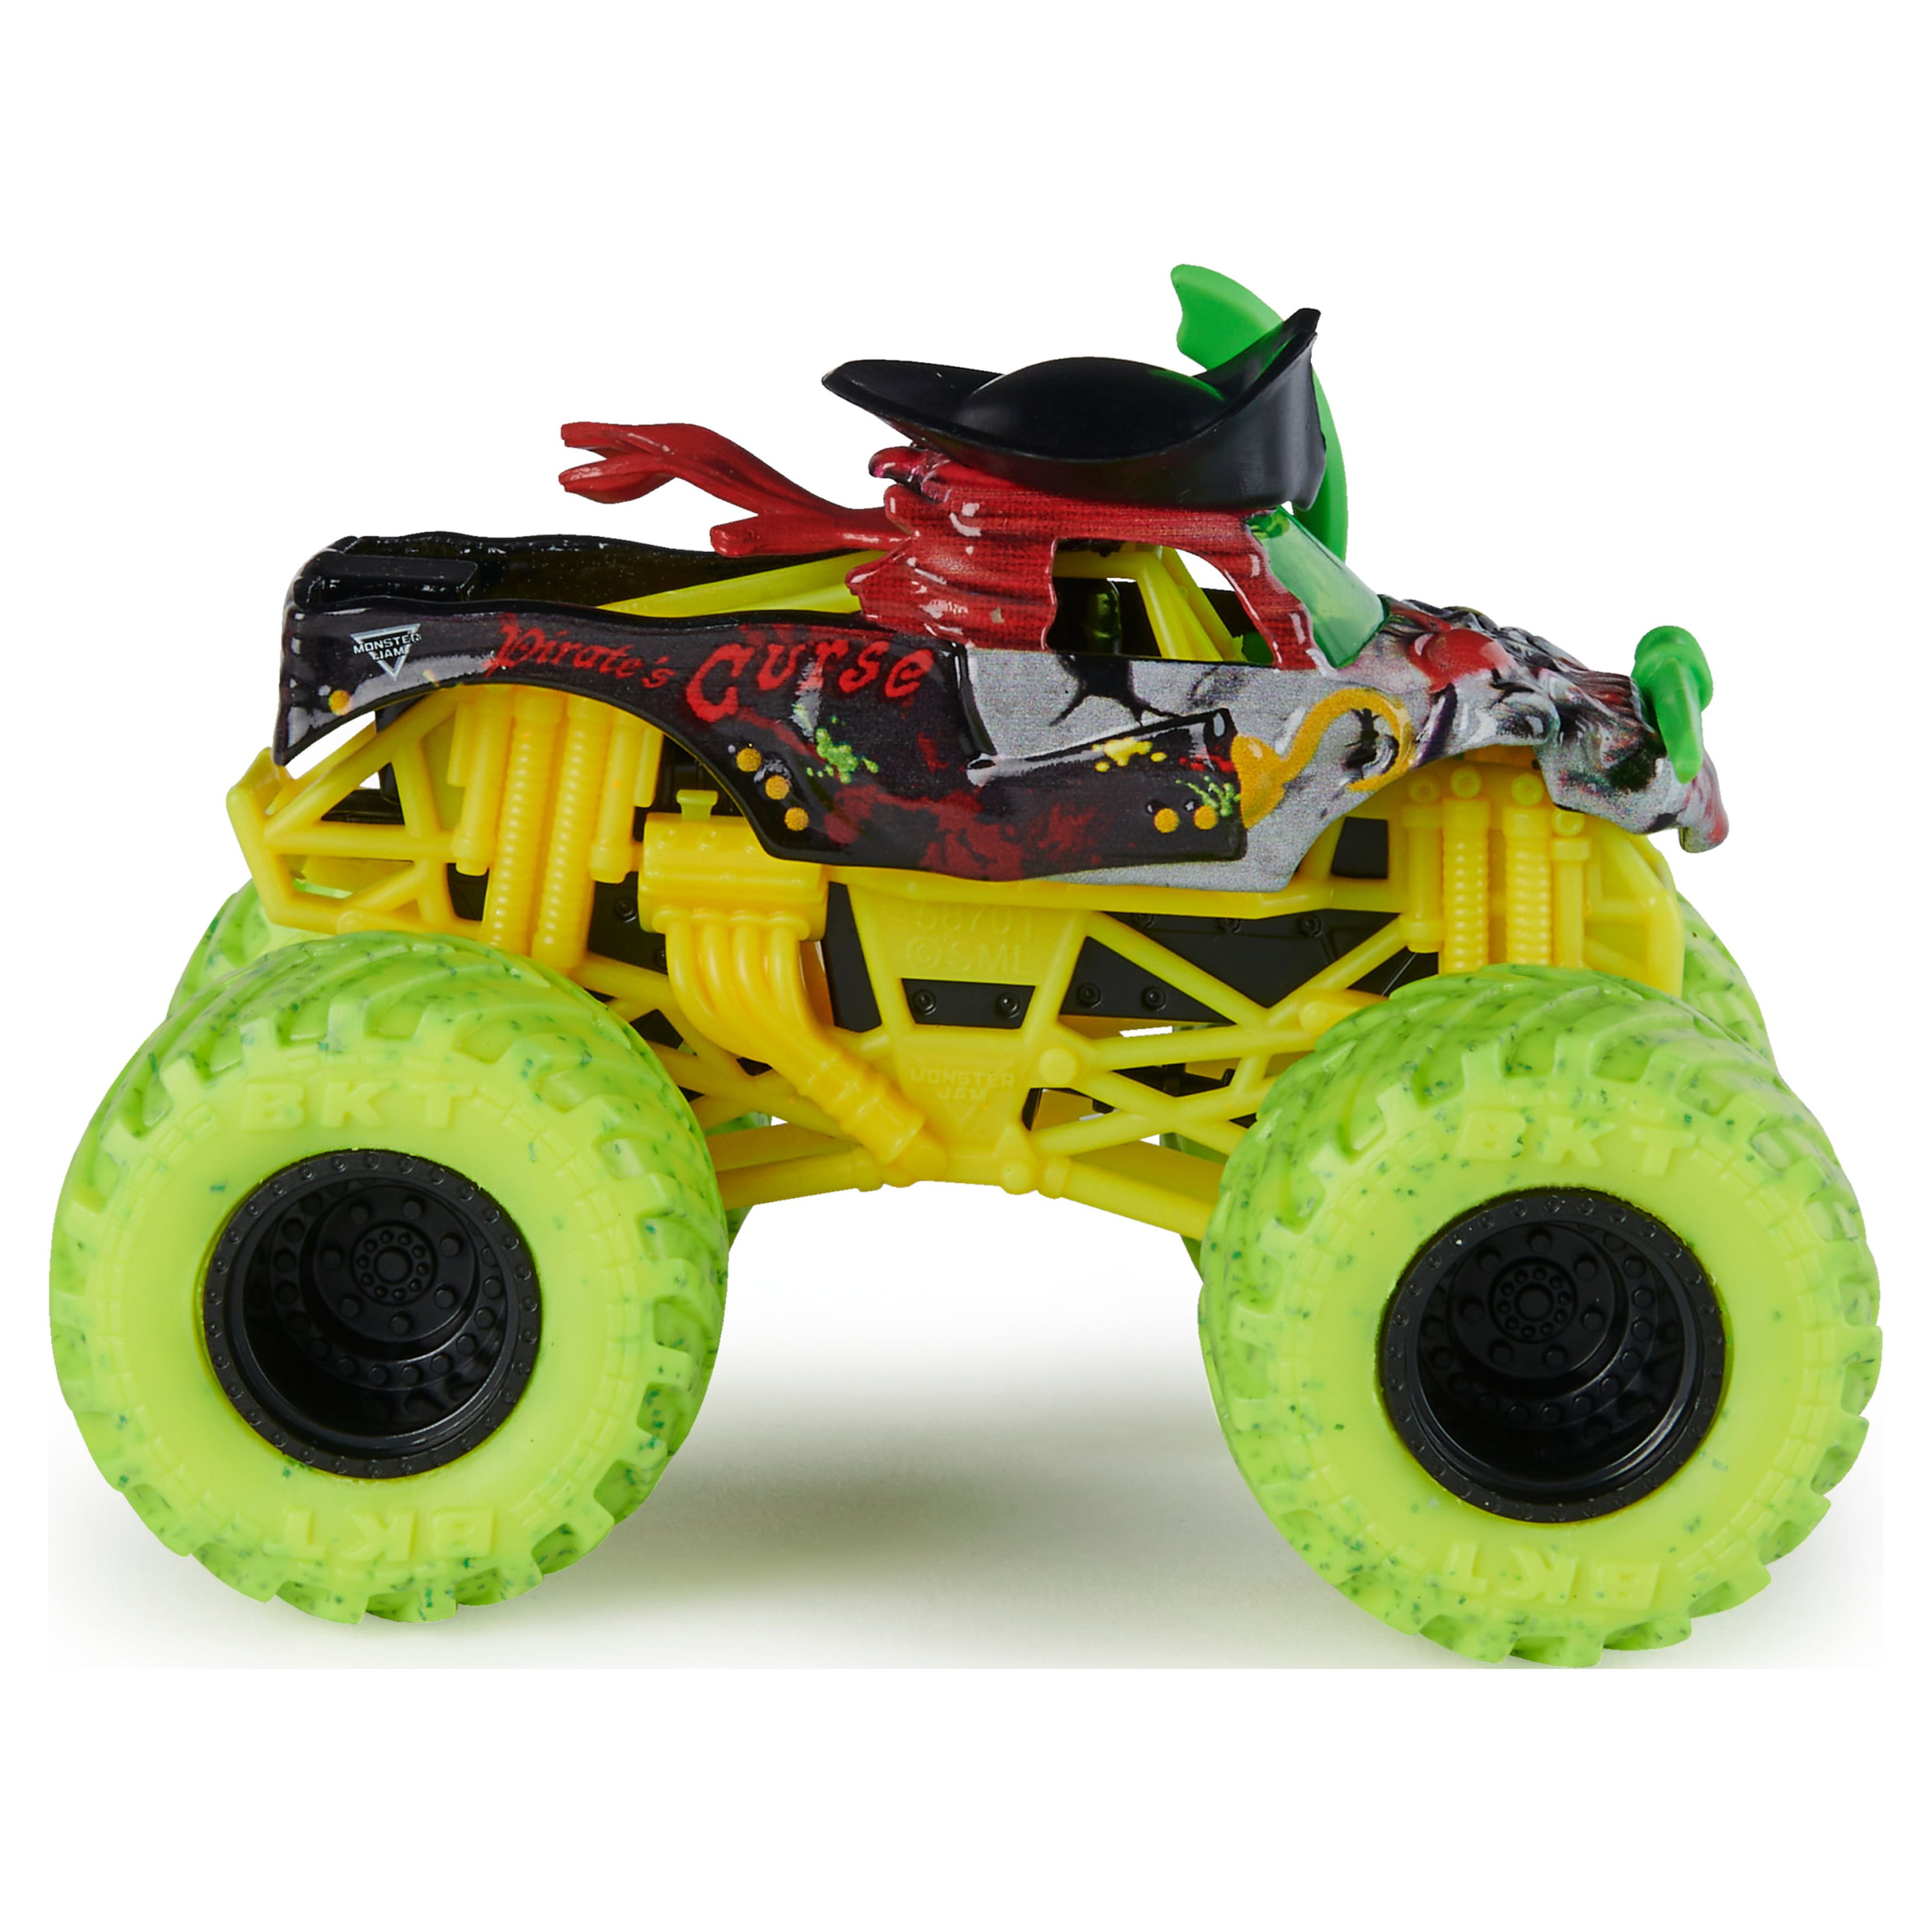 Monster Jam Gears and Galaxies Die-Cast Monster Truck, 1:64 Scale (Styles May Vary) - image 3 of 7